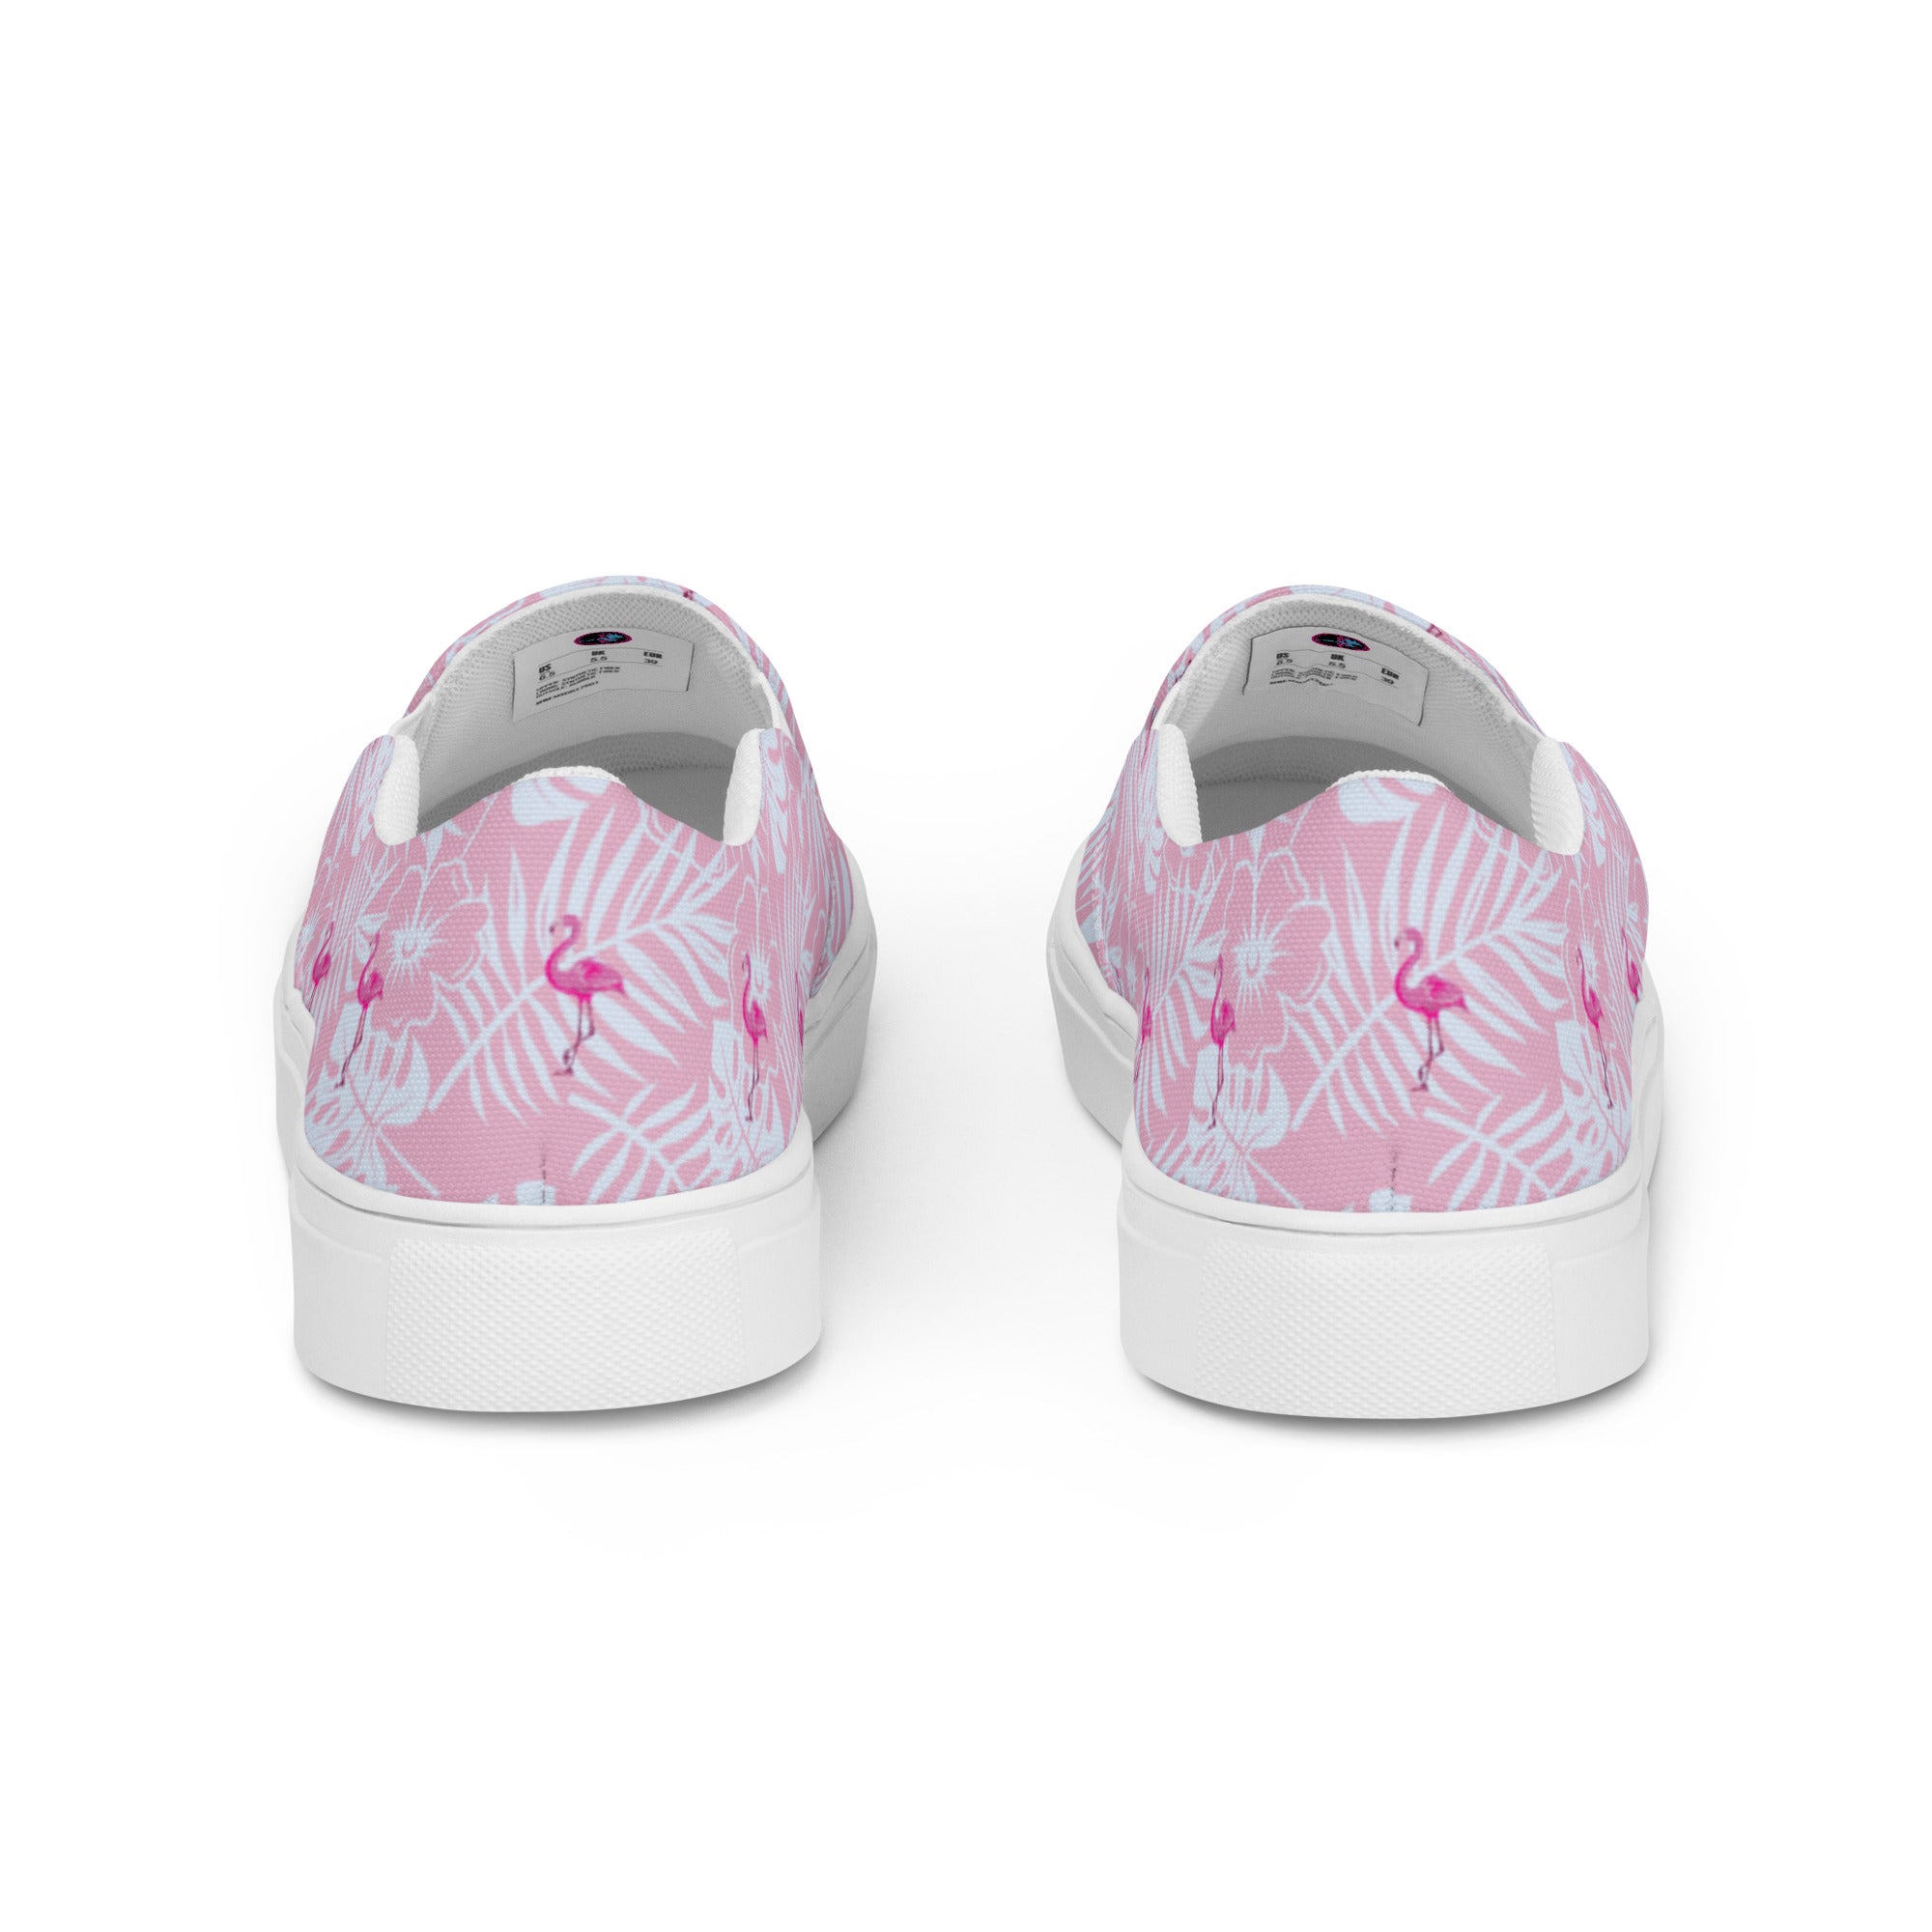 Rad Palm Party Like A Flockstar Pink Men’s Slip-On Canvas Shoes